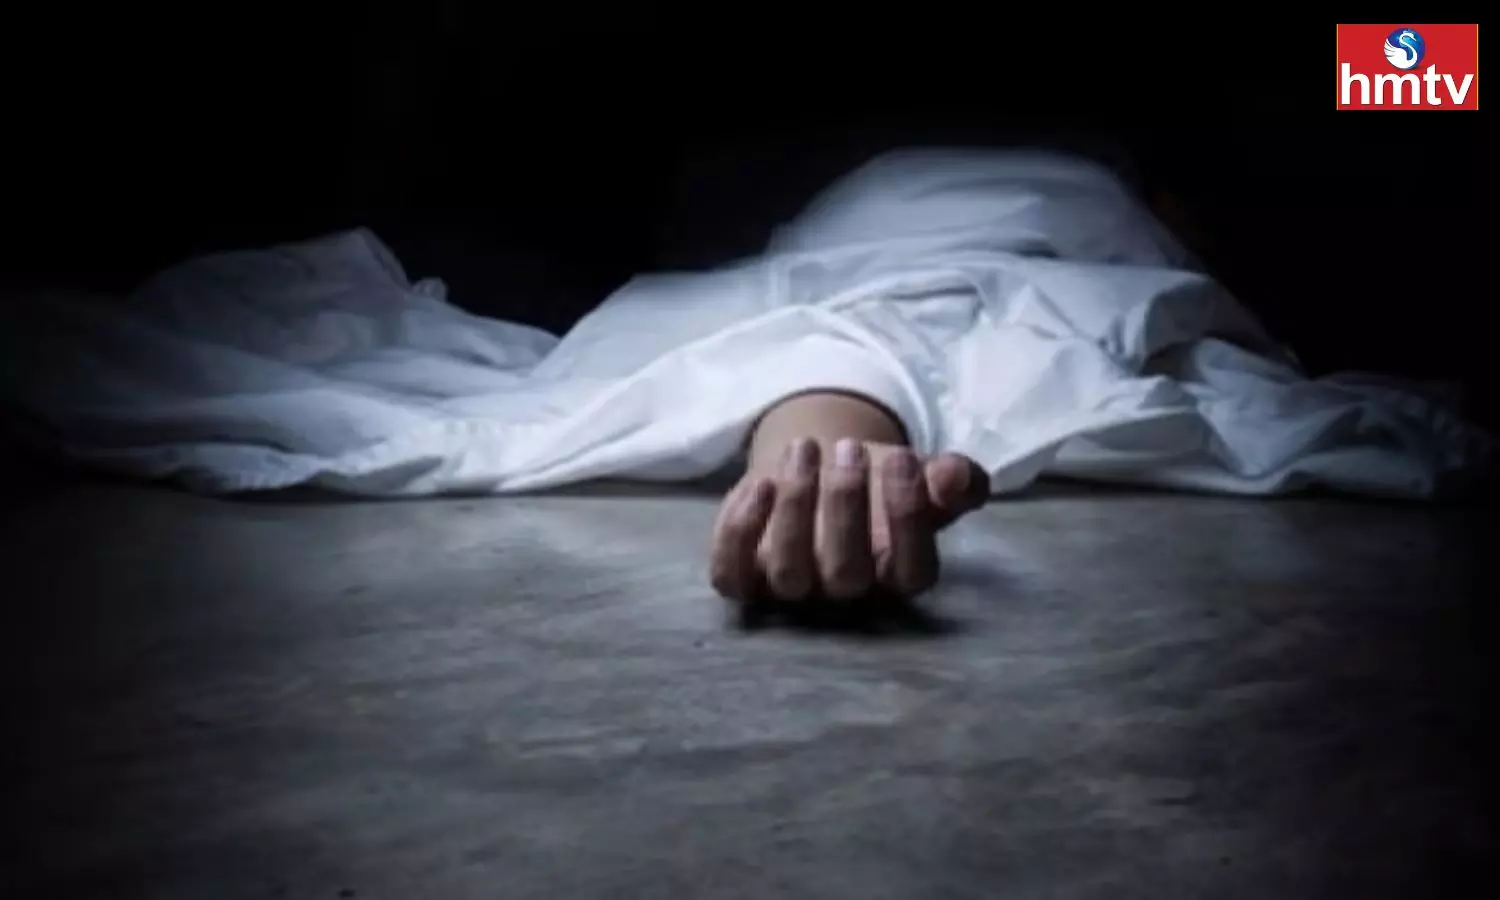 Woman Committed Suicide By Consuming Mixing Sleeping Tablets And Nail Polish In Alluri District